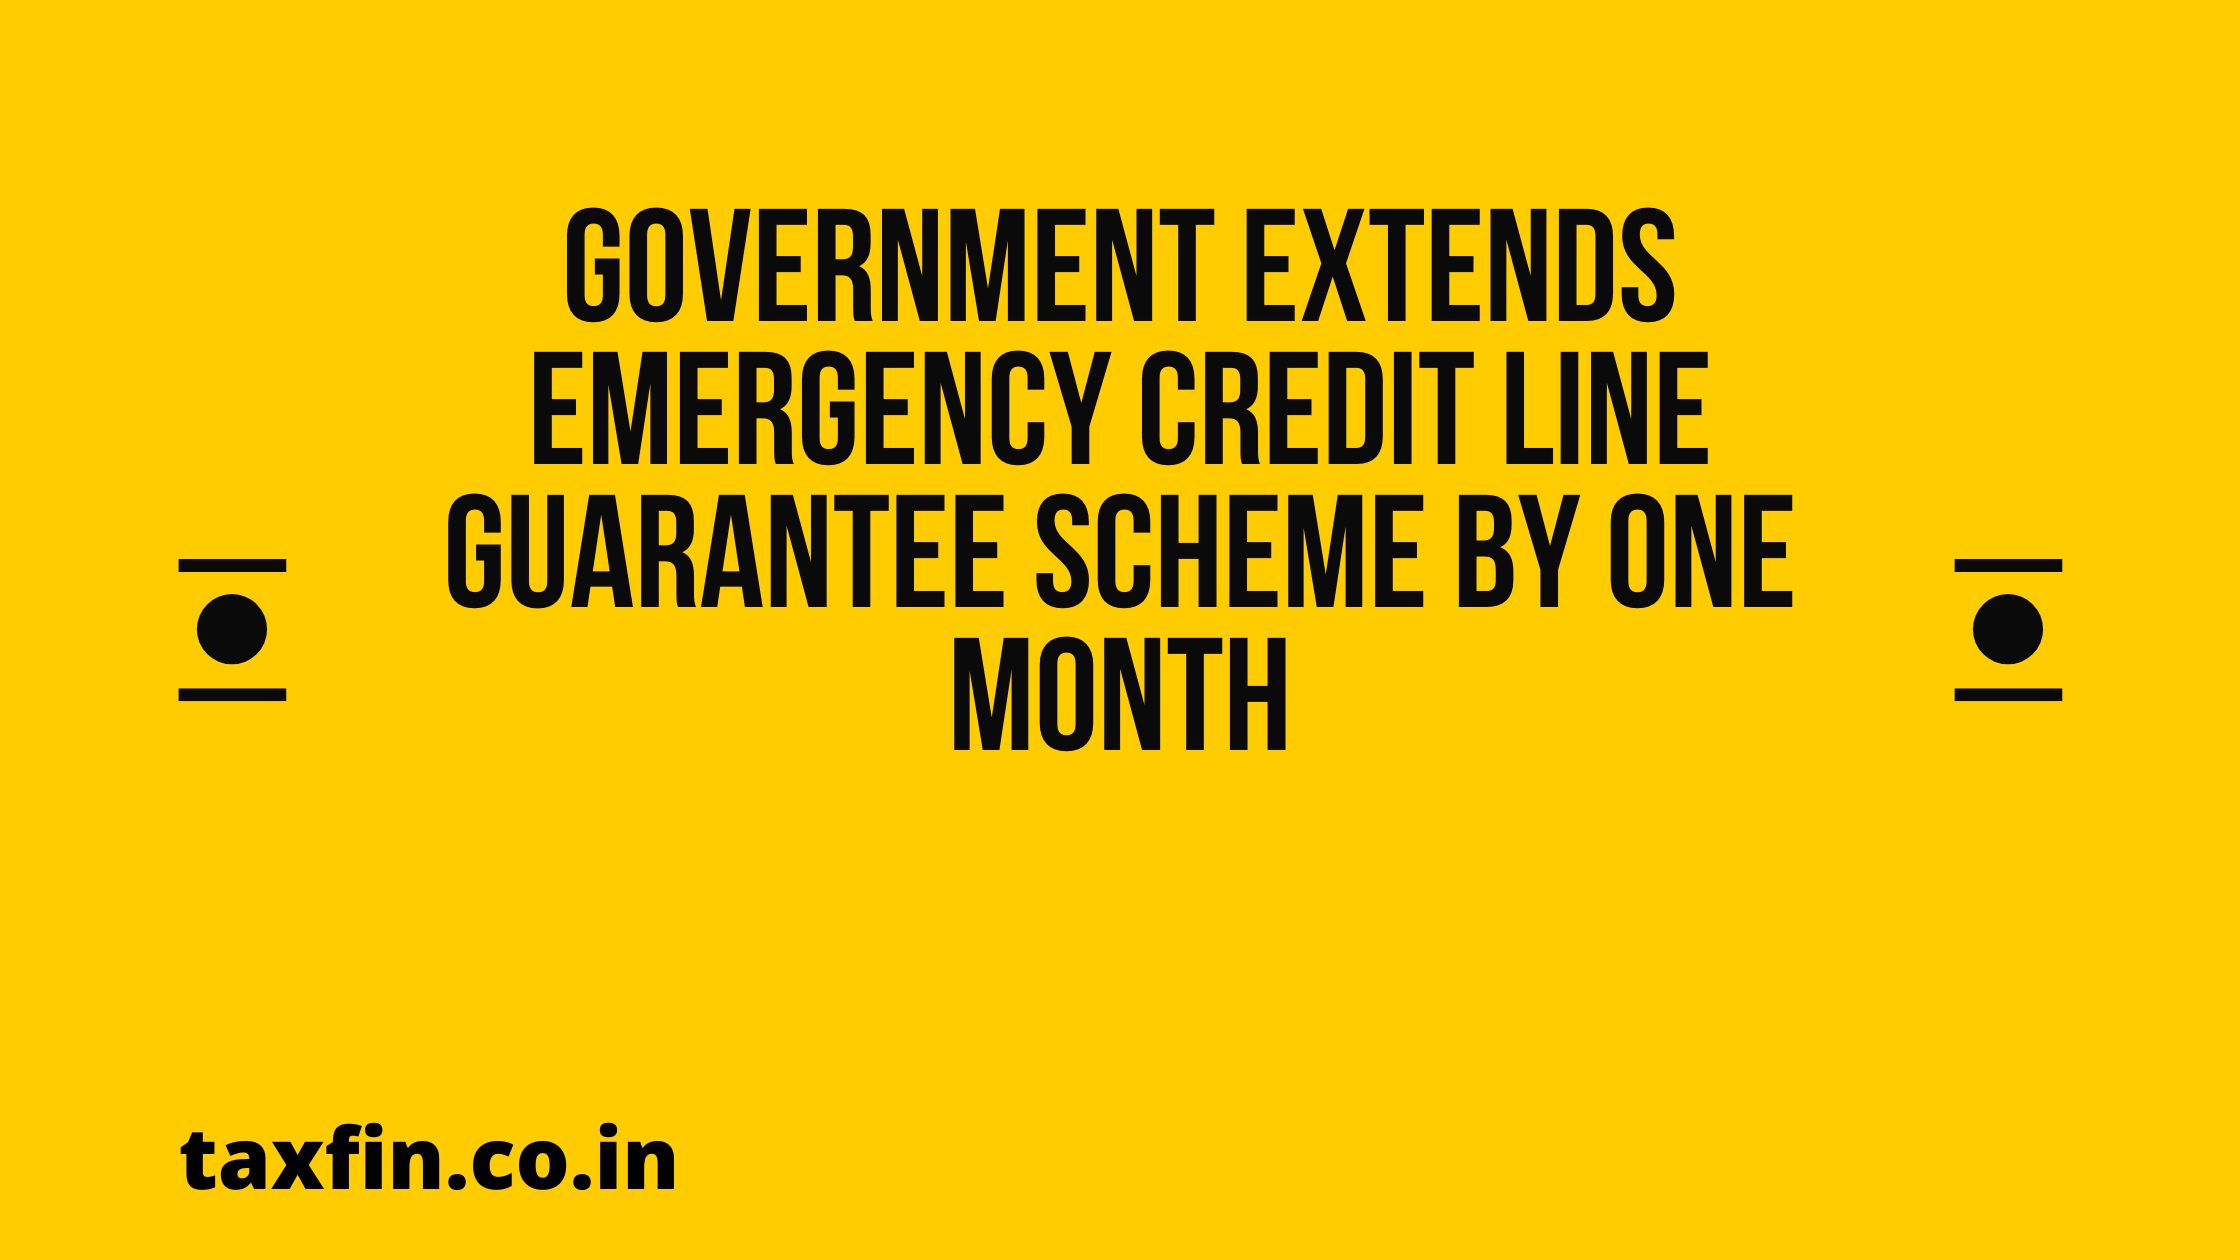 Government extends Emergency Credit Line Guarantee Scheme by one month